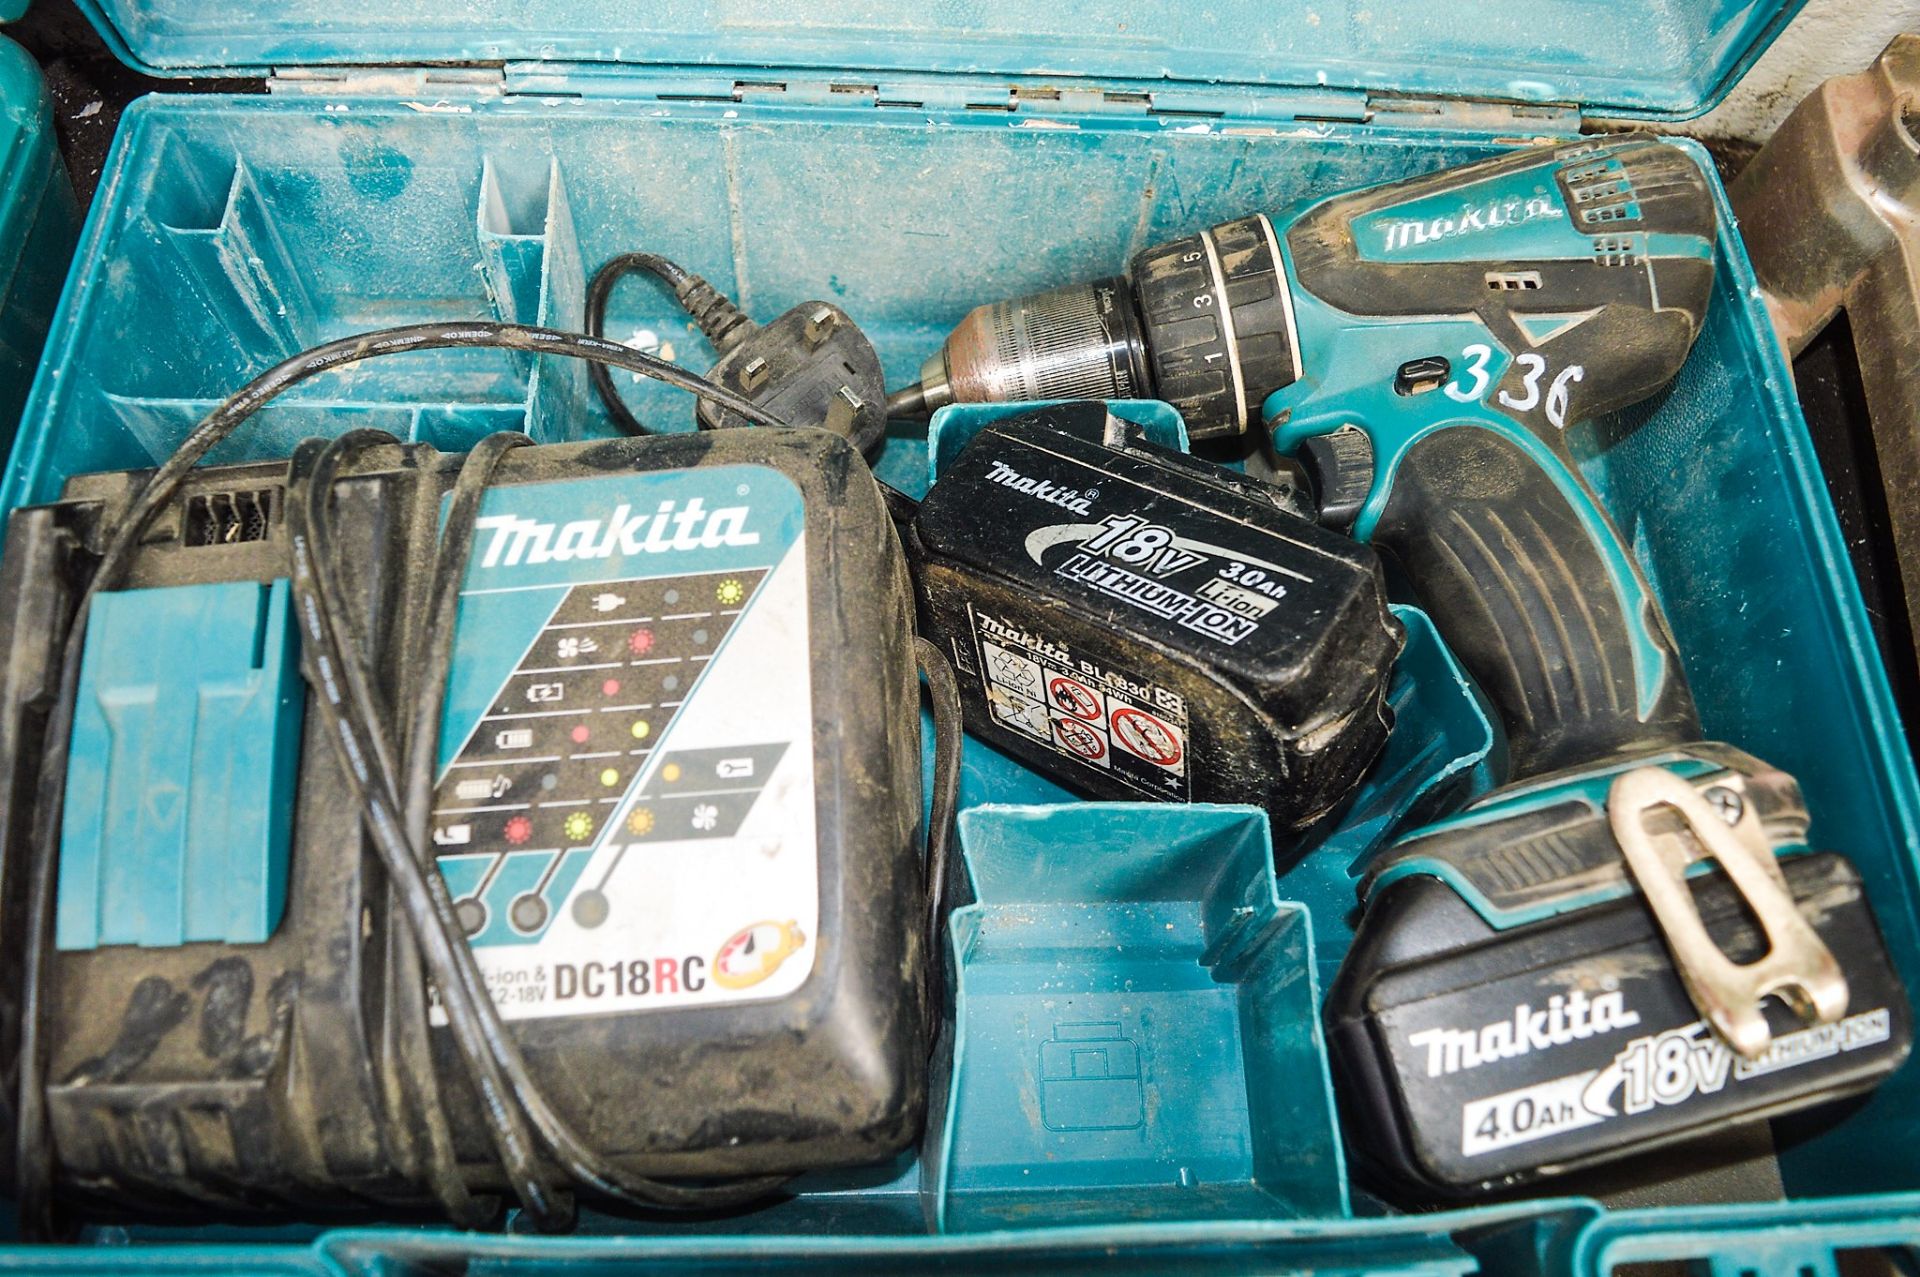 Makita 18v cordless power drill c/w charger, 2 batteries & carry case A597381